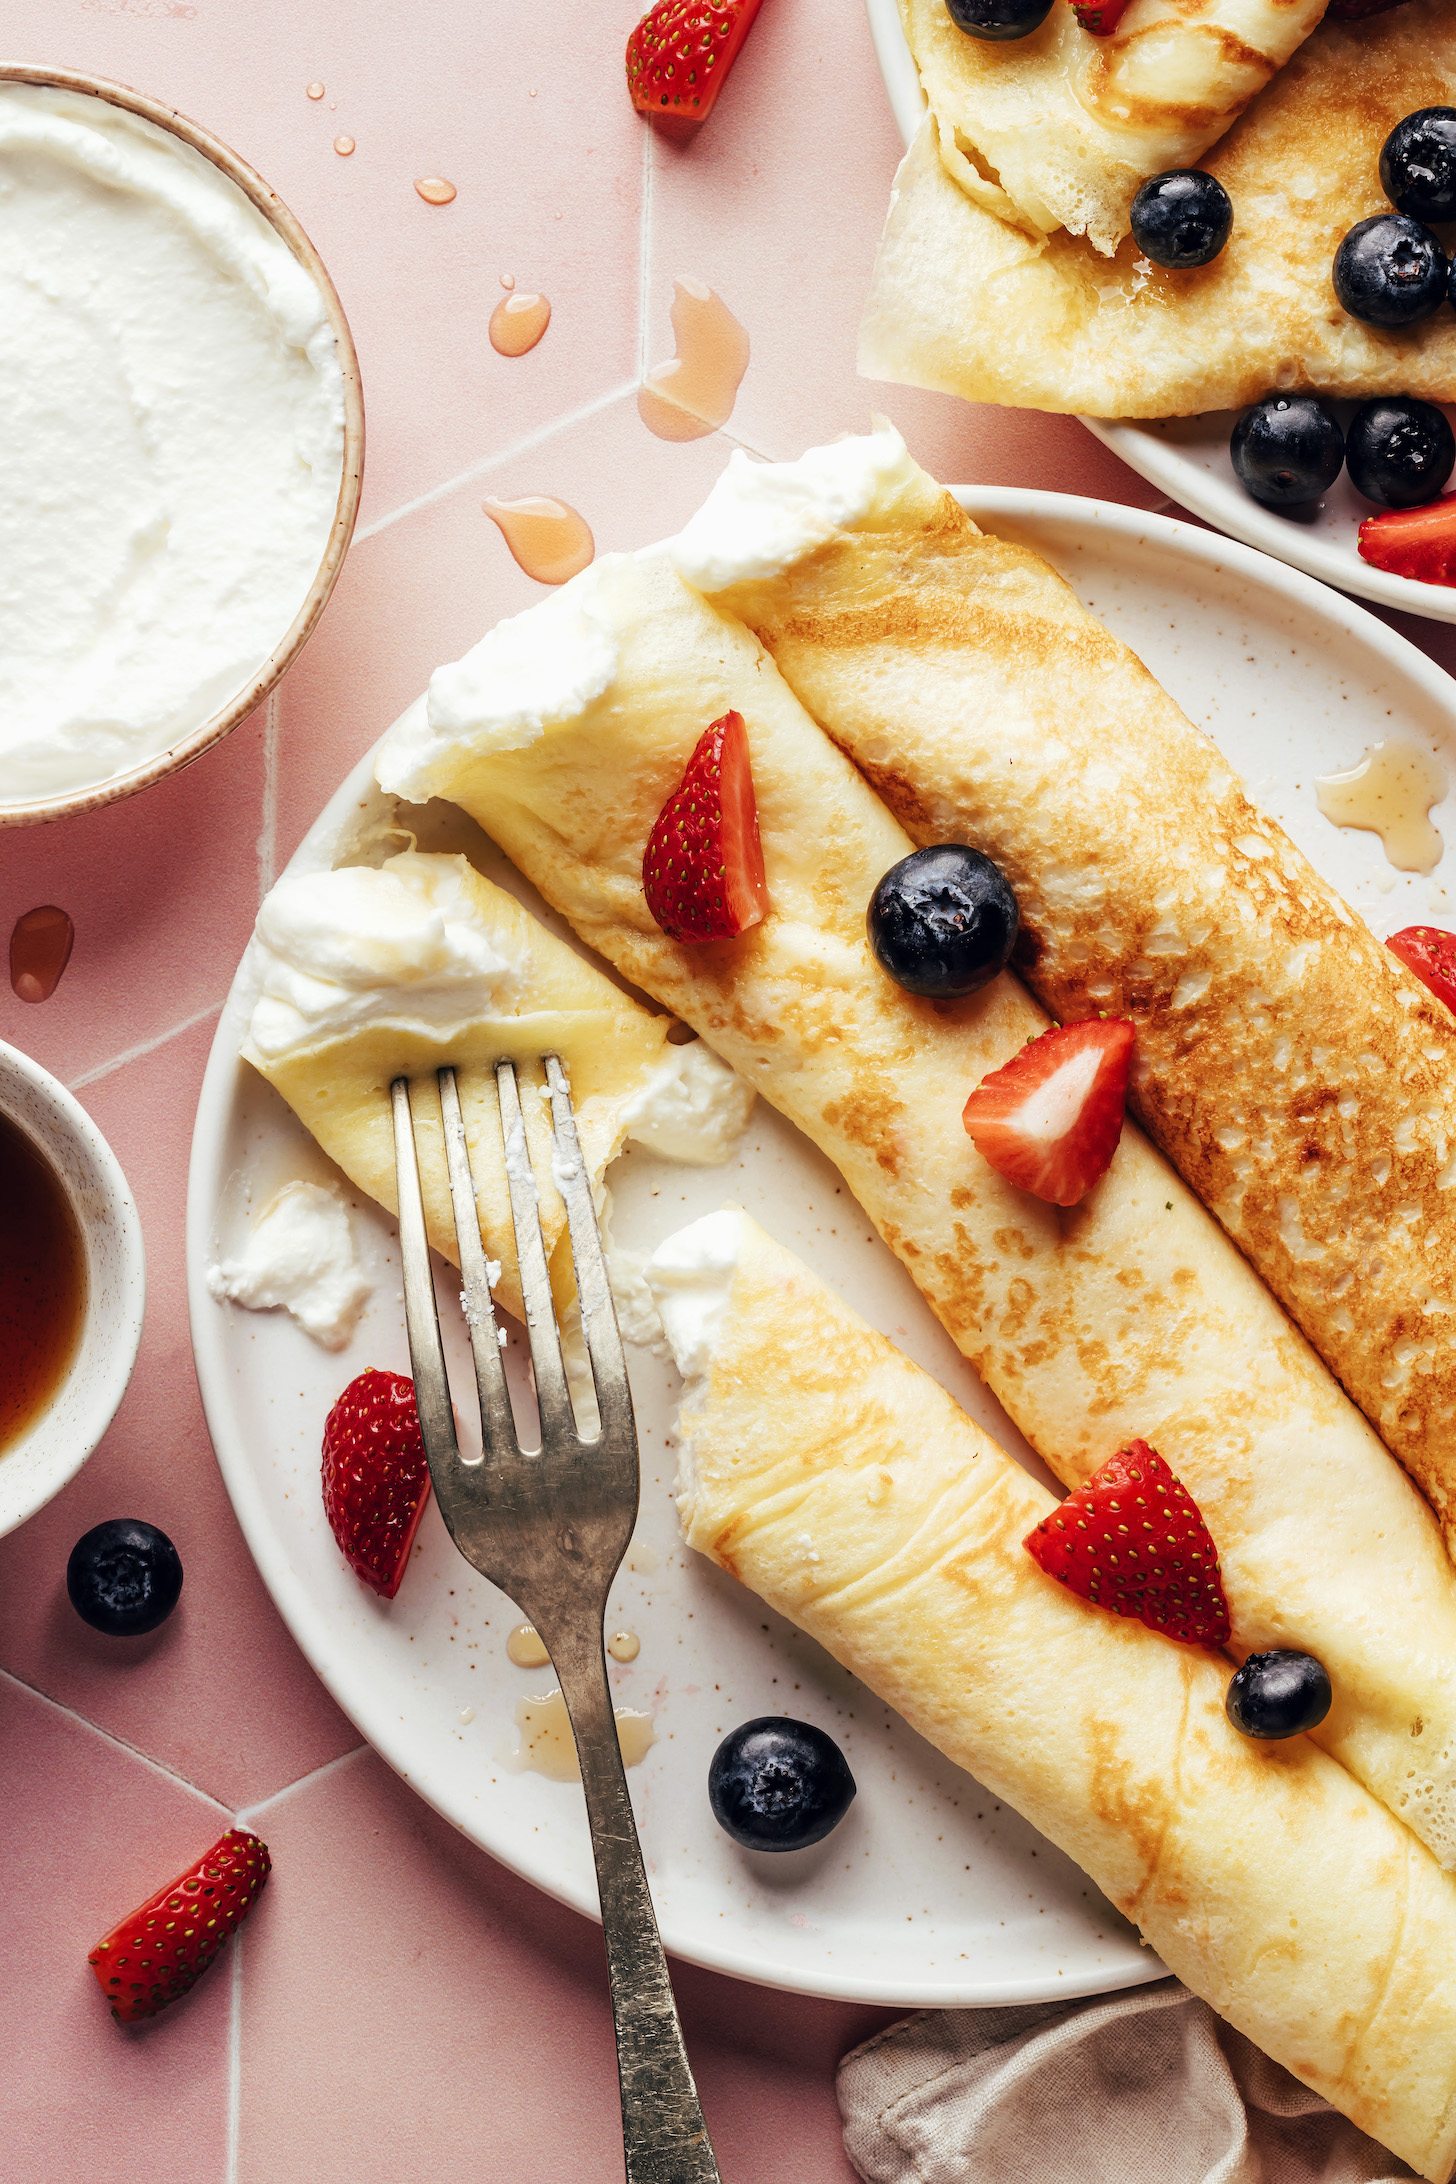 Plate of rolled up gluten-free crepes filled with coconut whipped cream and topped with berries